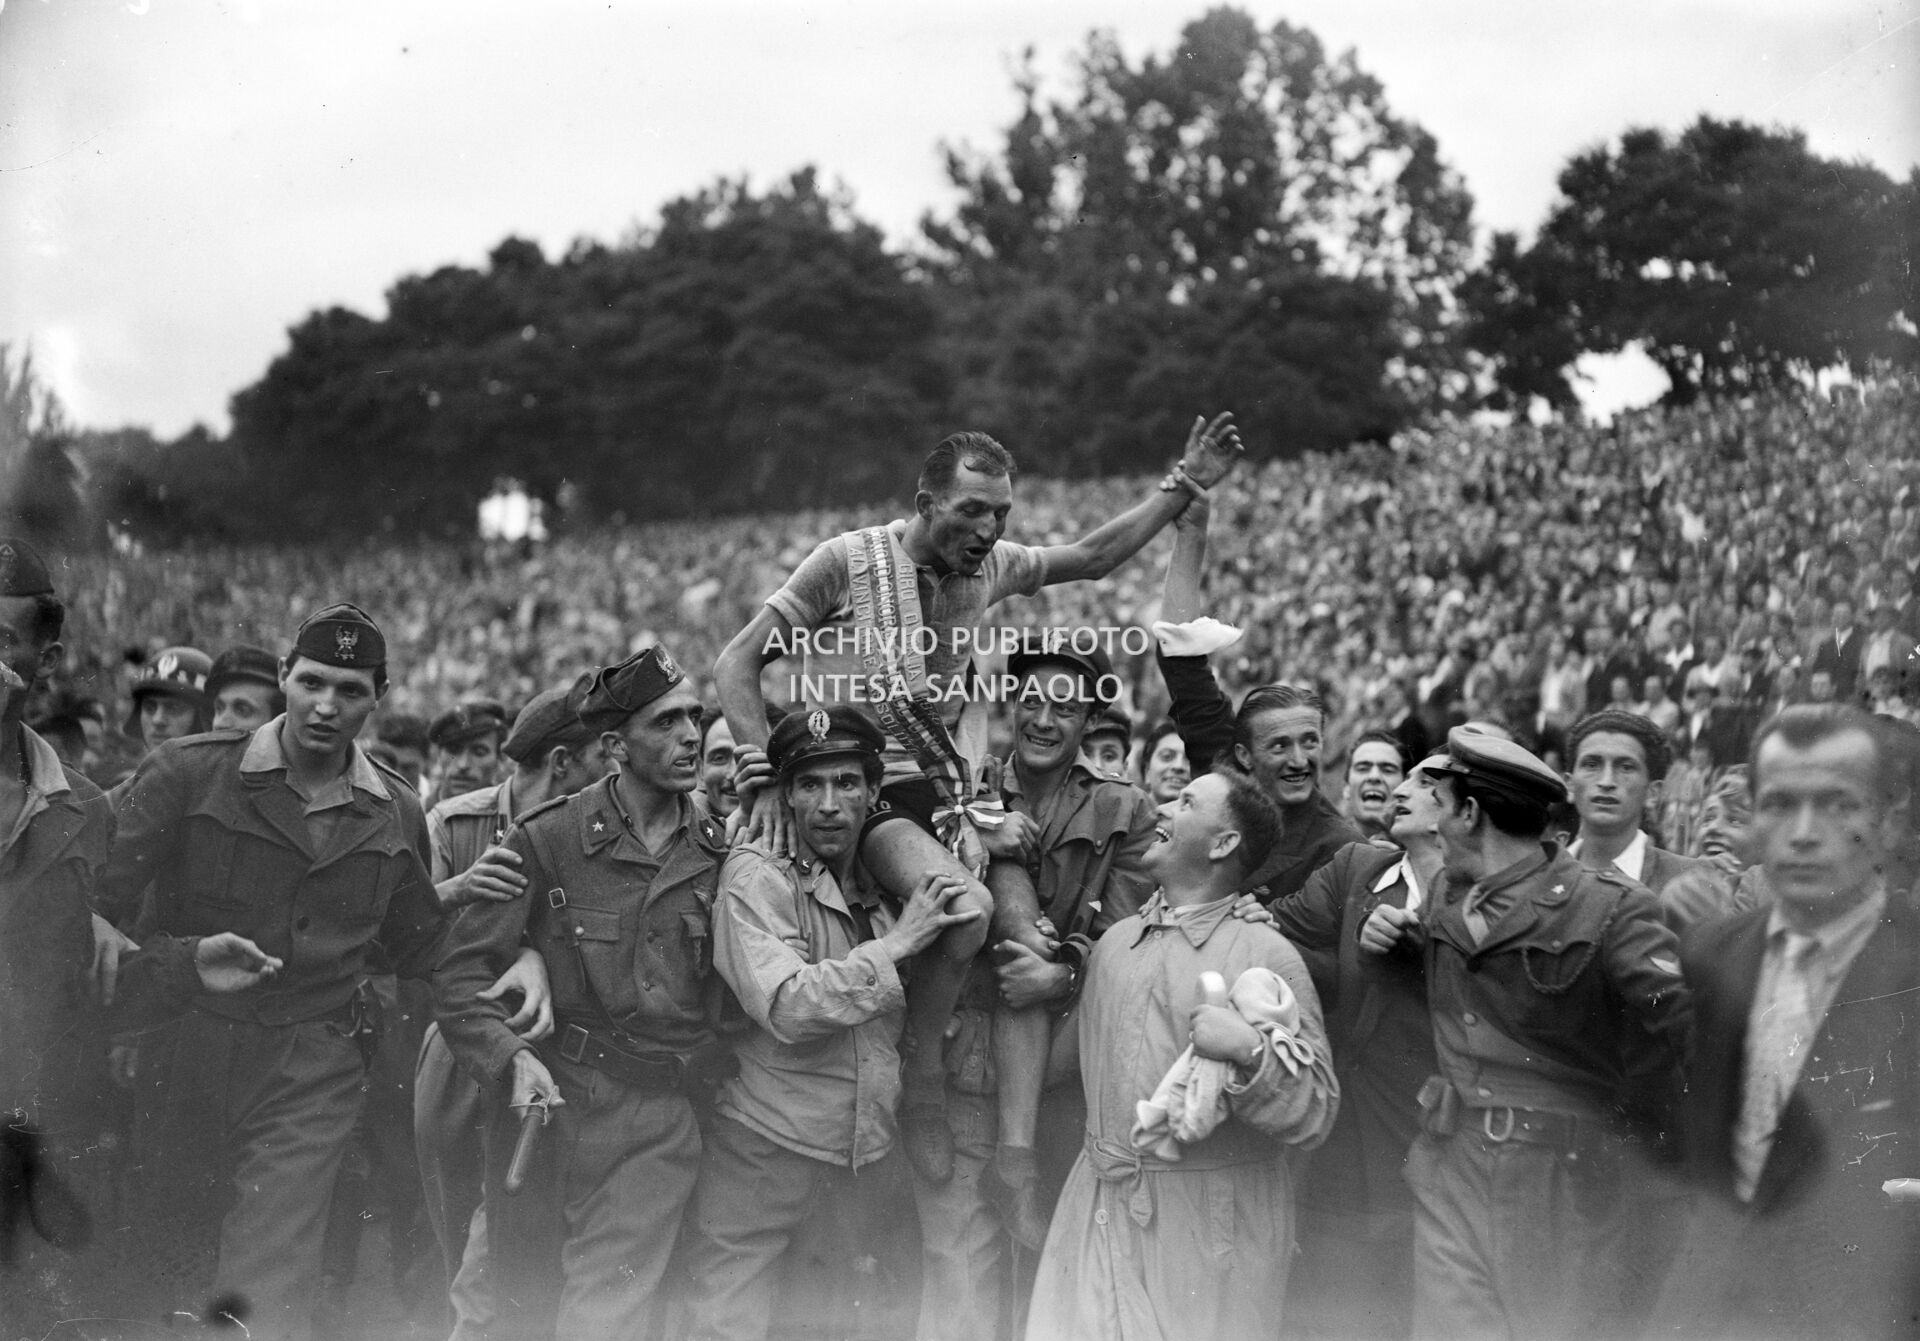 Gino Bartali carried triumphantly by fans at the Arena of Milan where he has just finished the 29° Giro d'Italia